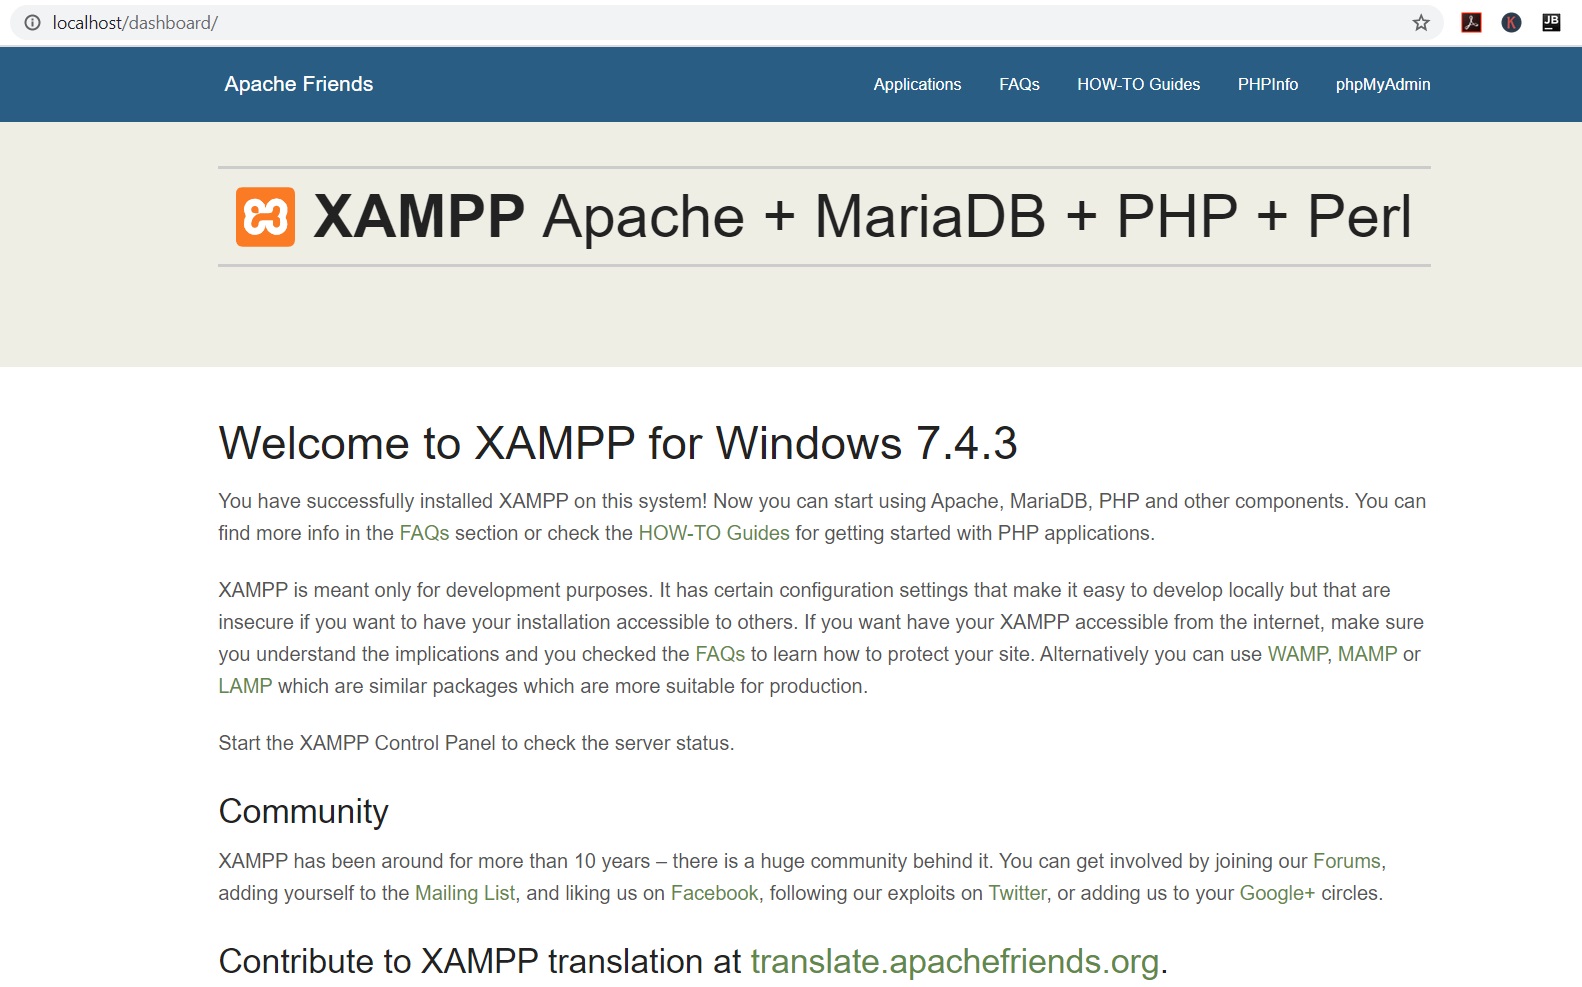 XAMPP localhost page in Browser